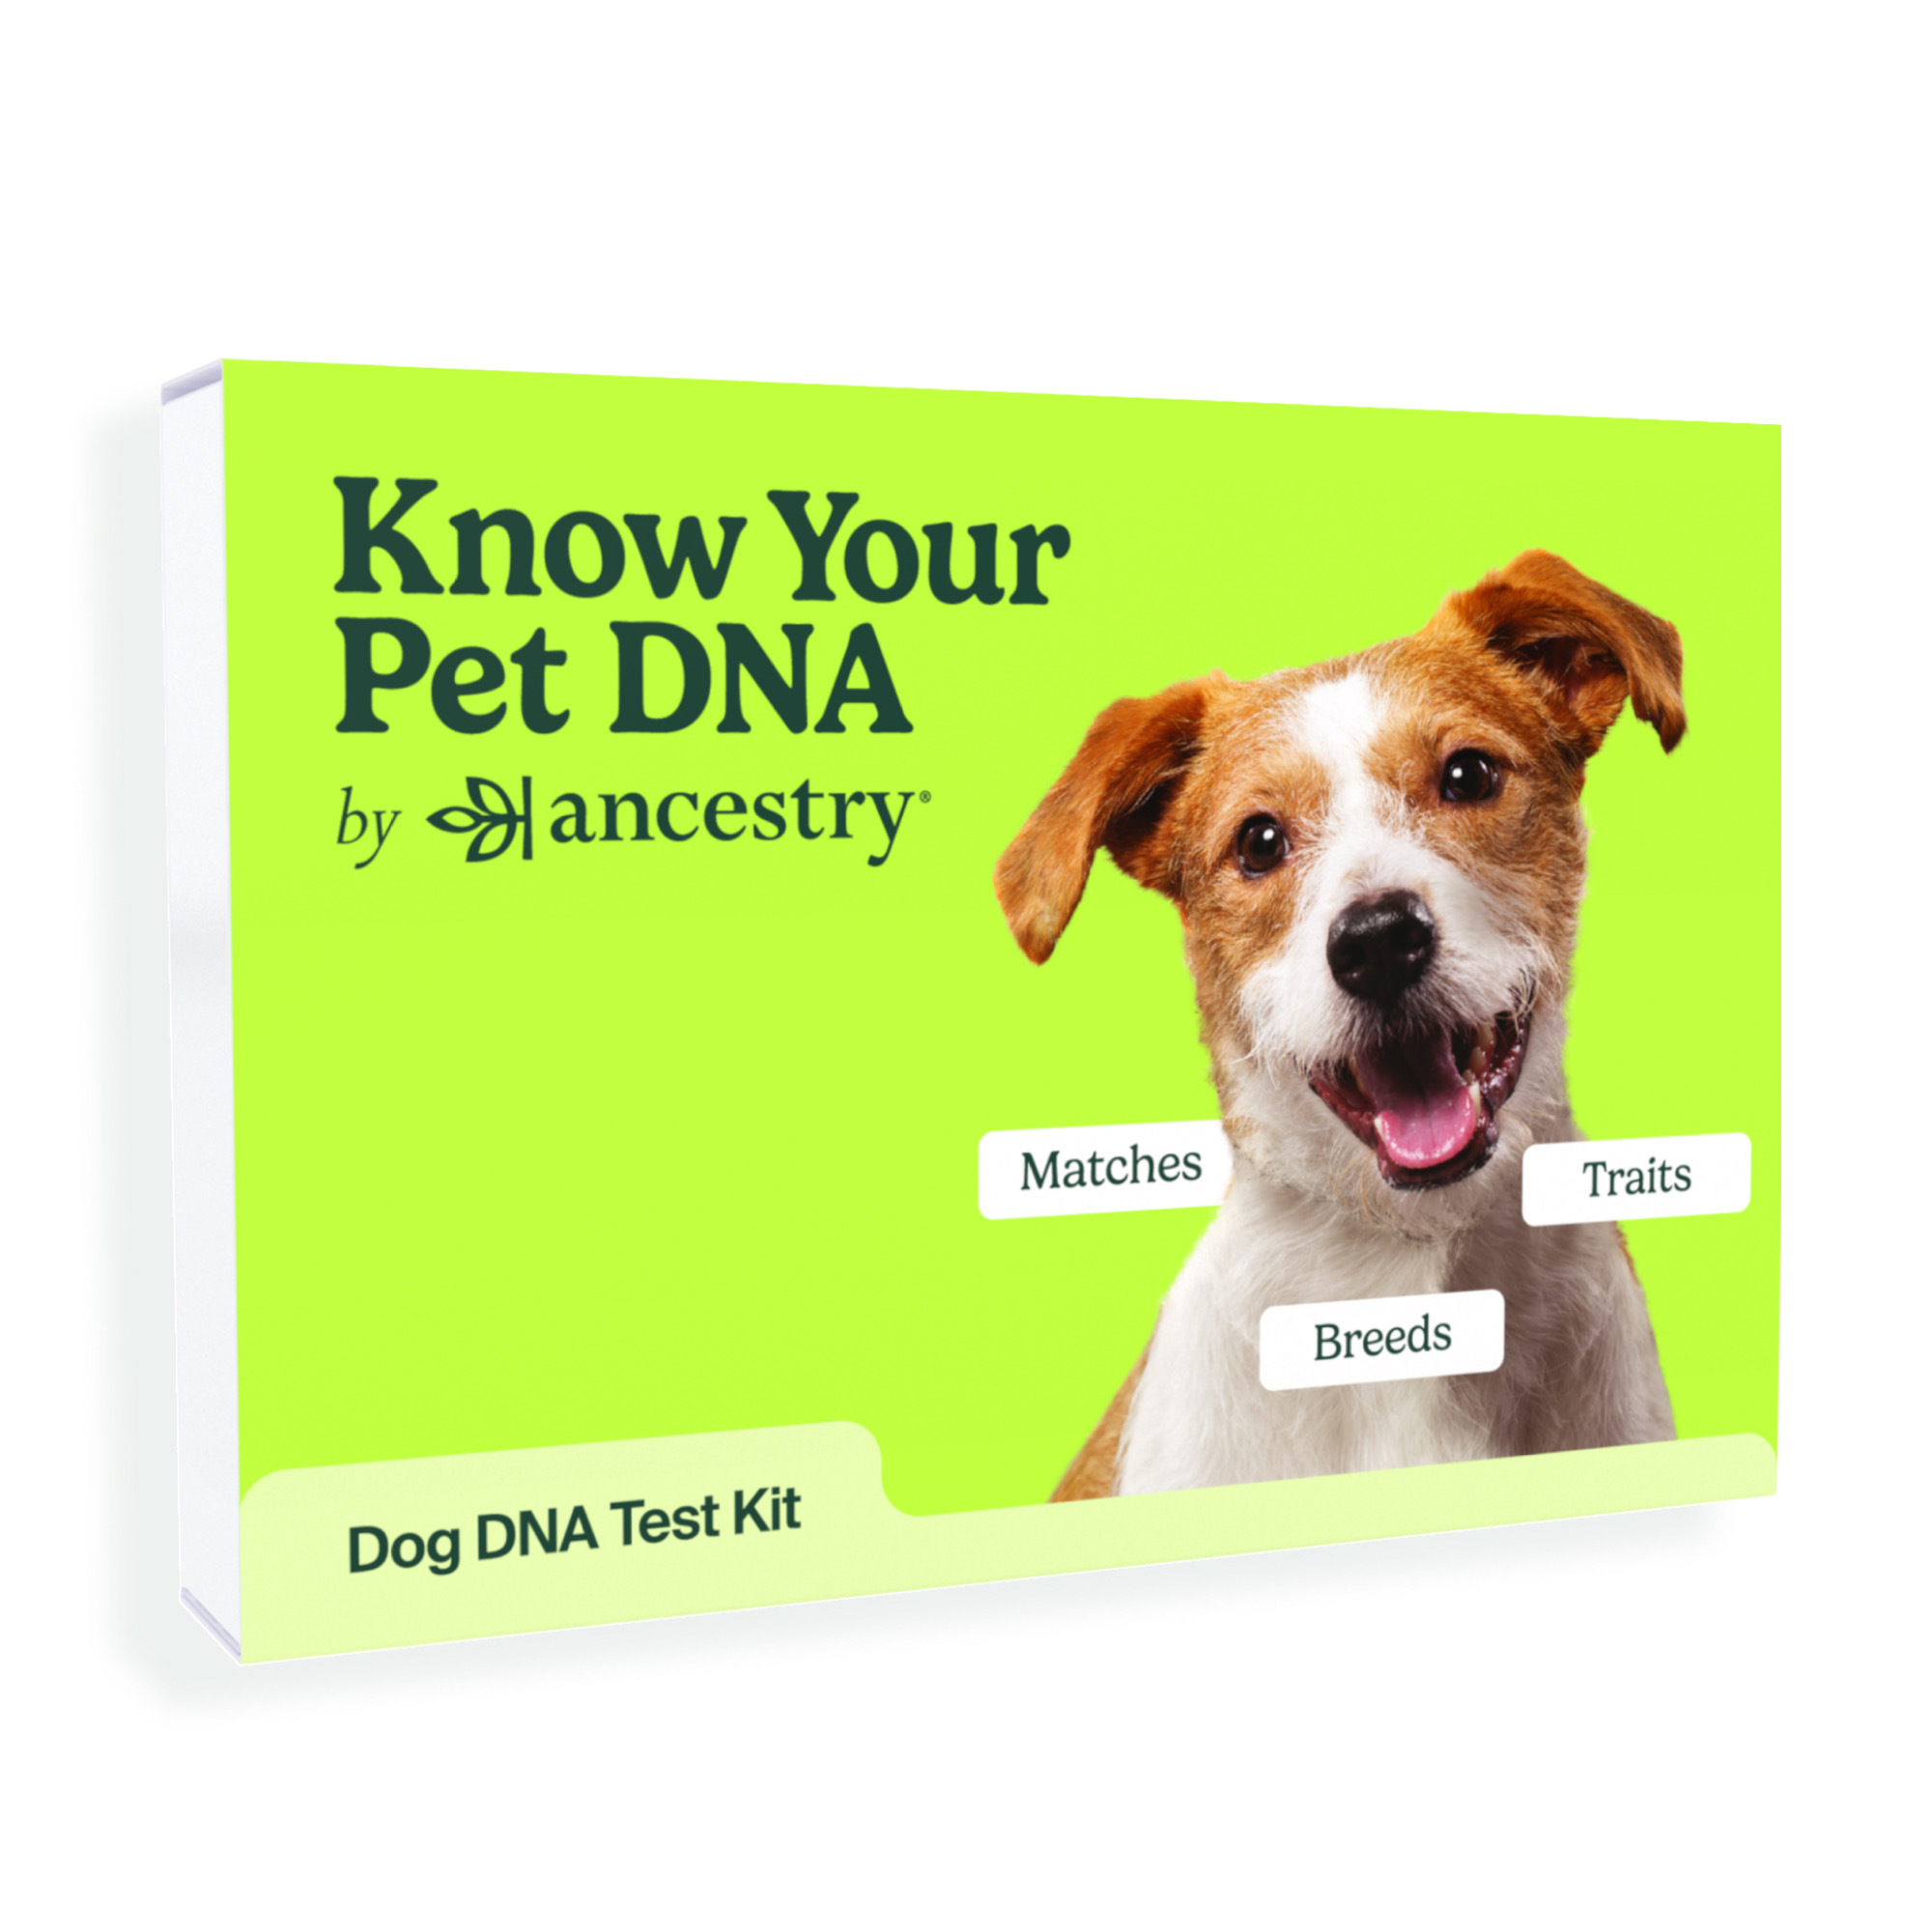 Know your pet DNA by Ancestry - Dot DNA Test Kit